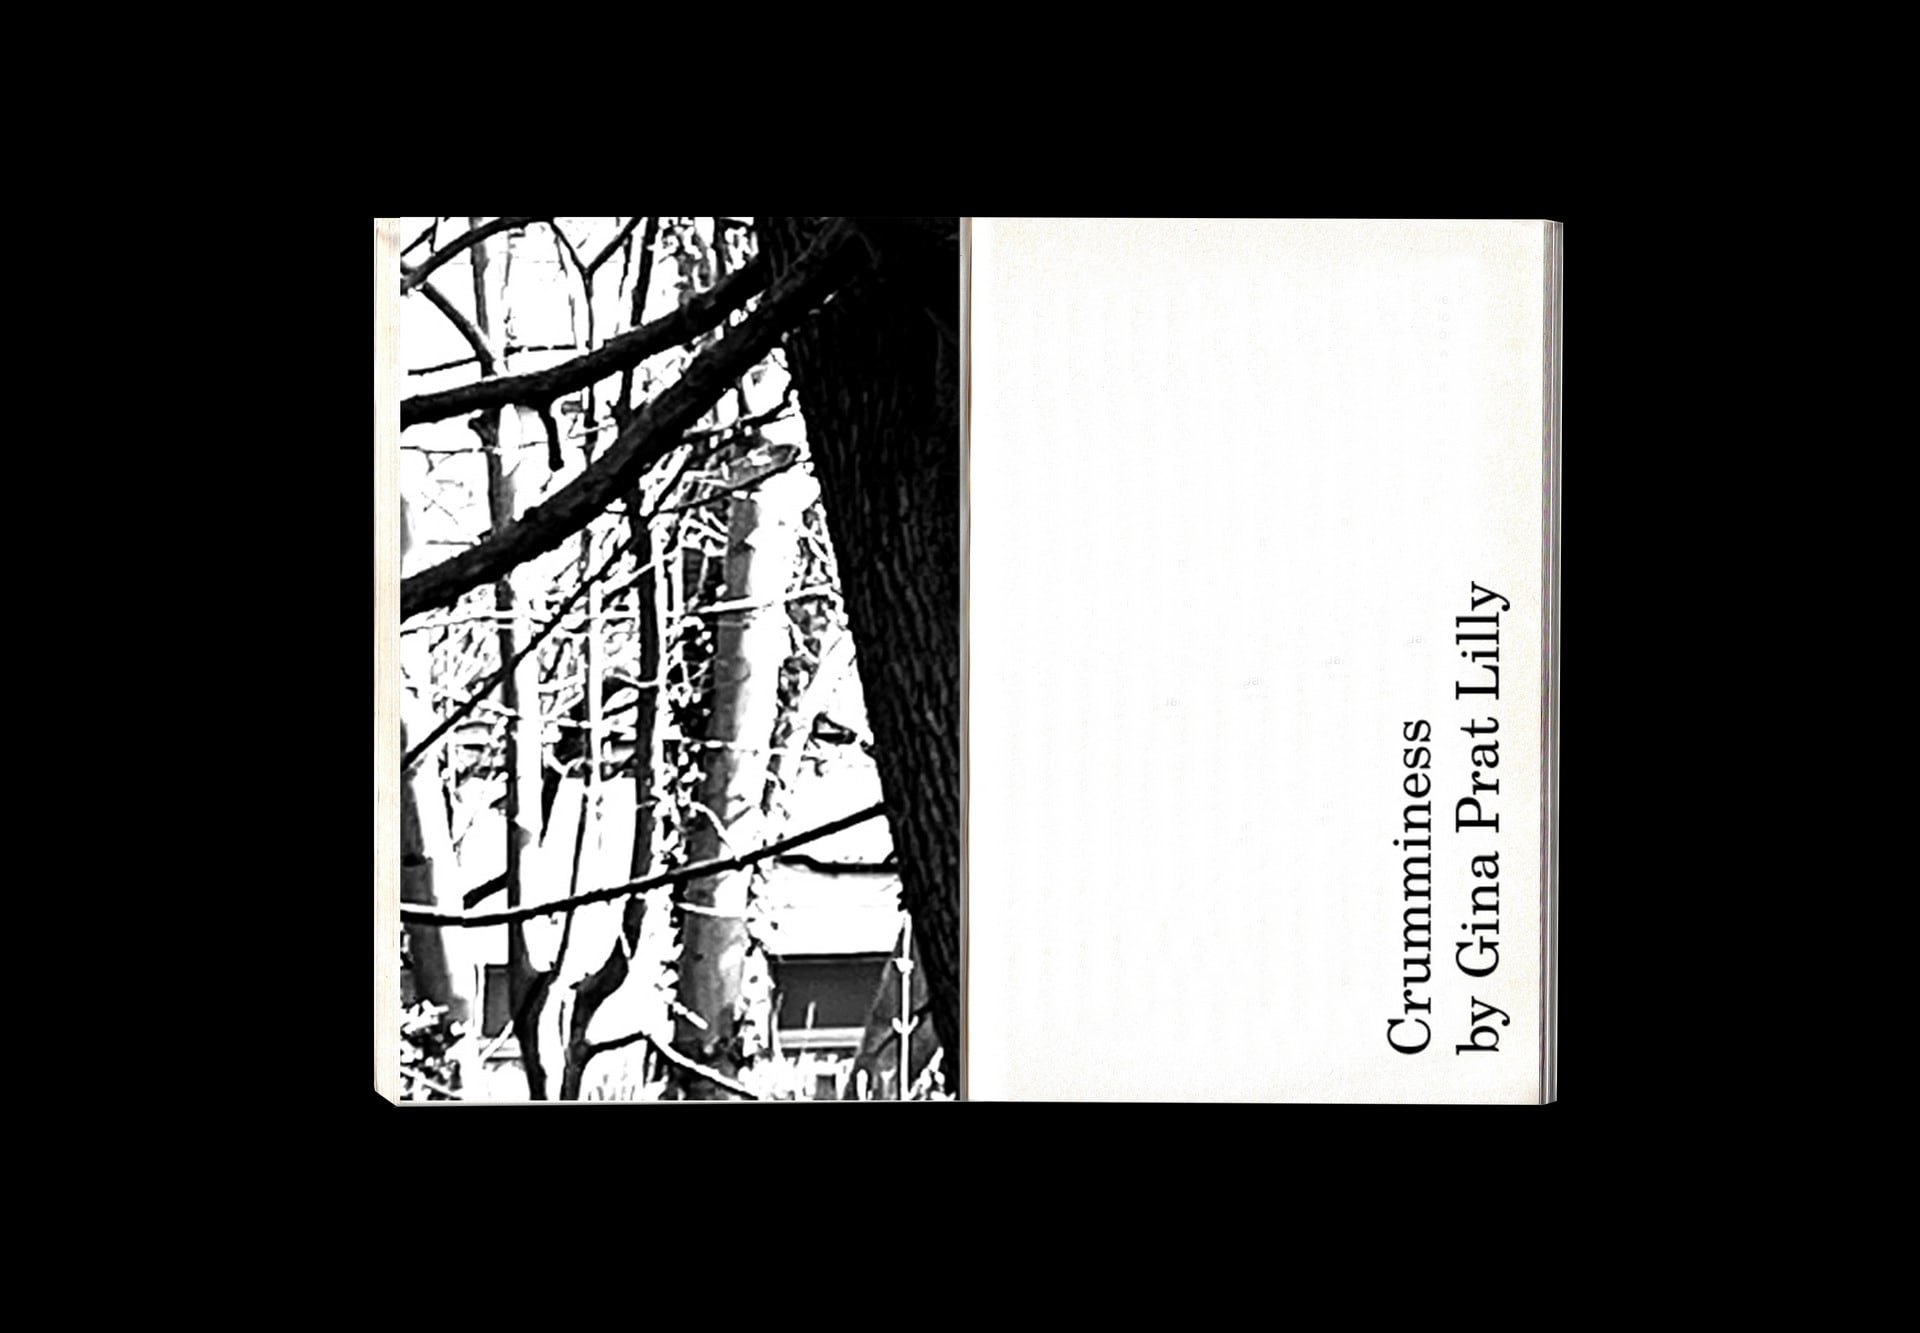 Open spread of book. Black background. Verso, black and white image of trees and vegetation. Recto, "Crumminess by Gina Prat Li